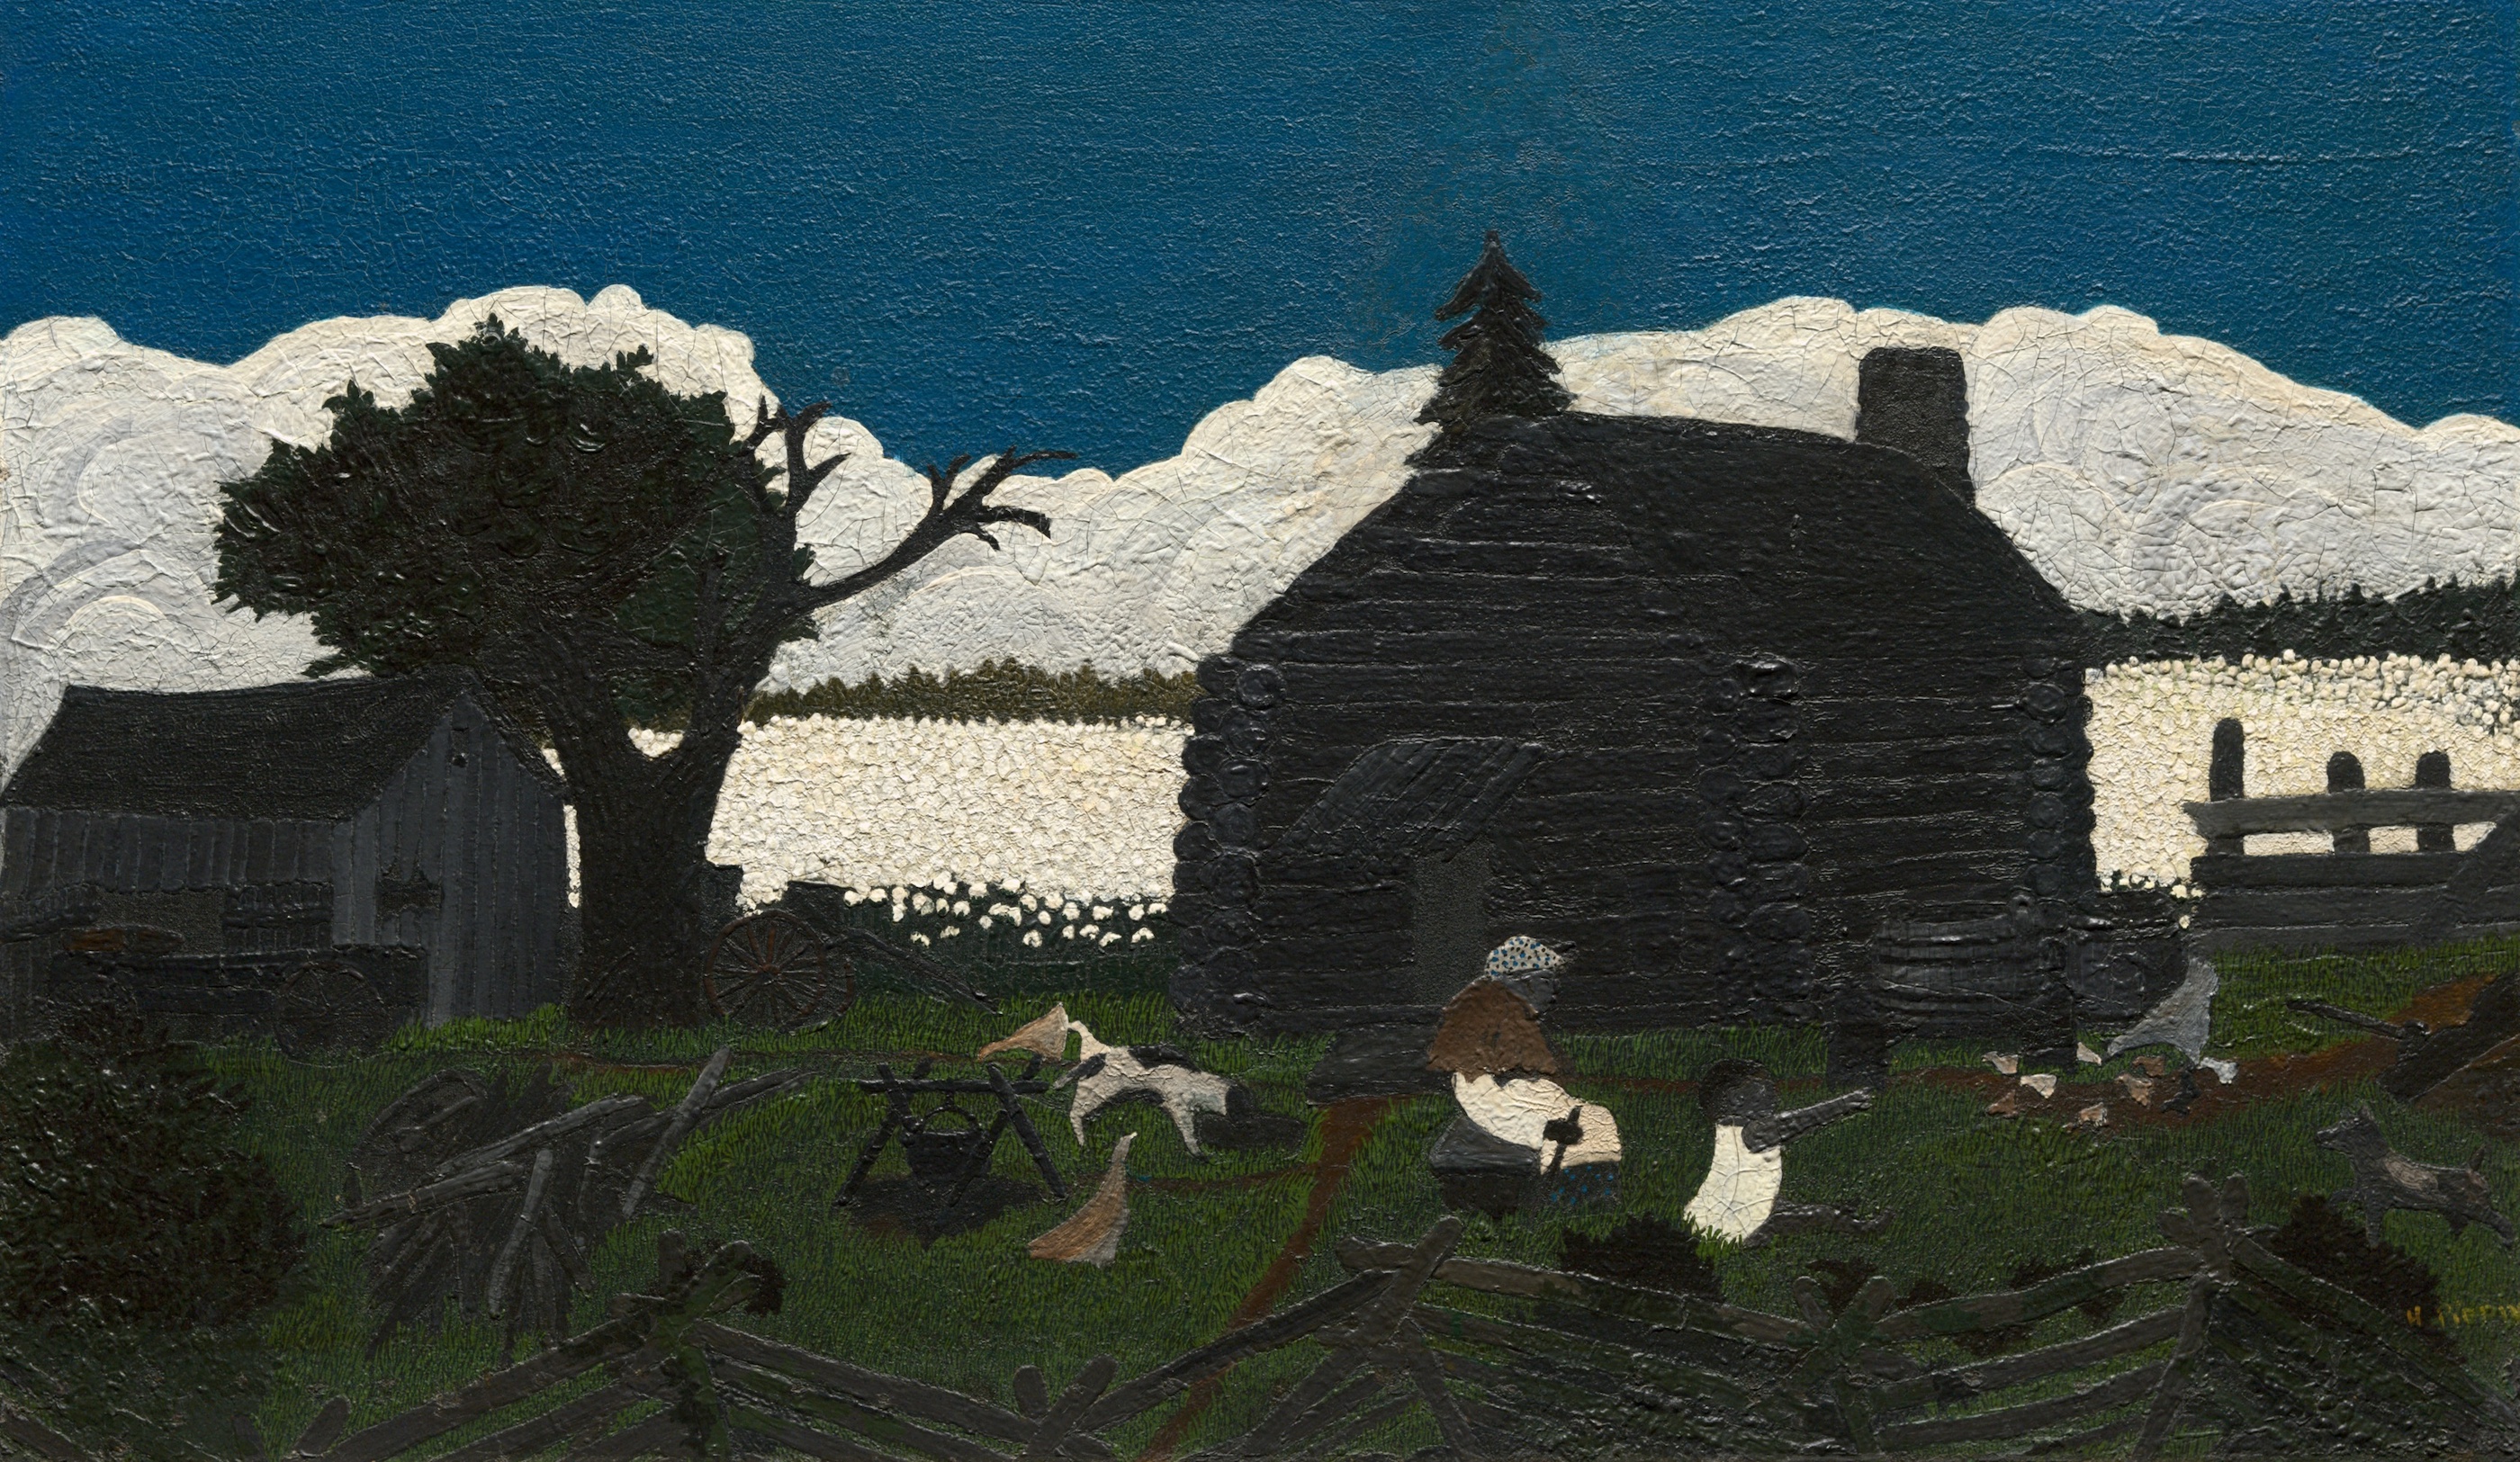 Cabin in the Cotton by Horace Pippin - c. 1931–1937 - 51 × 85 cm Art Institute of Chicago